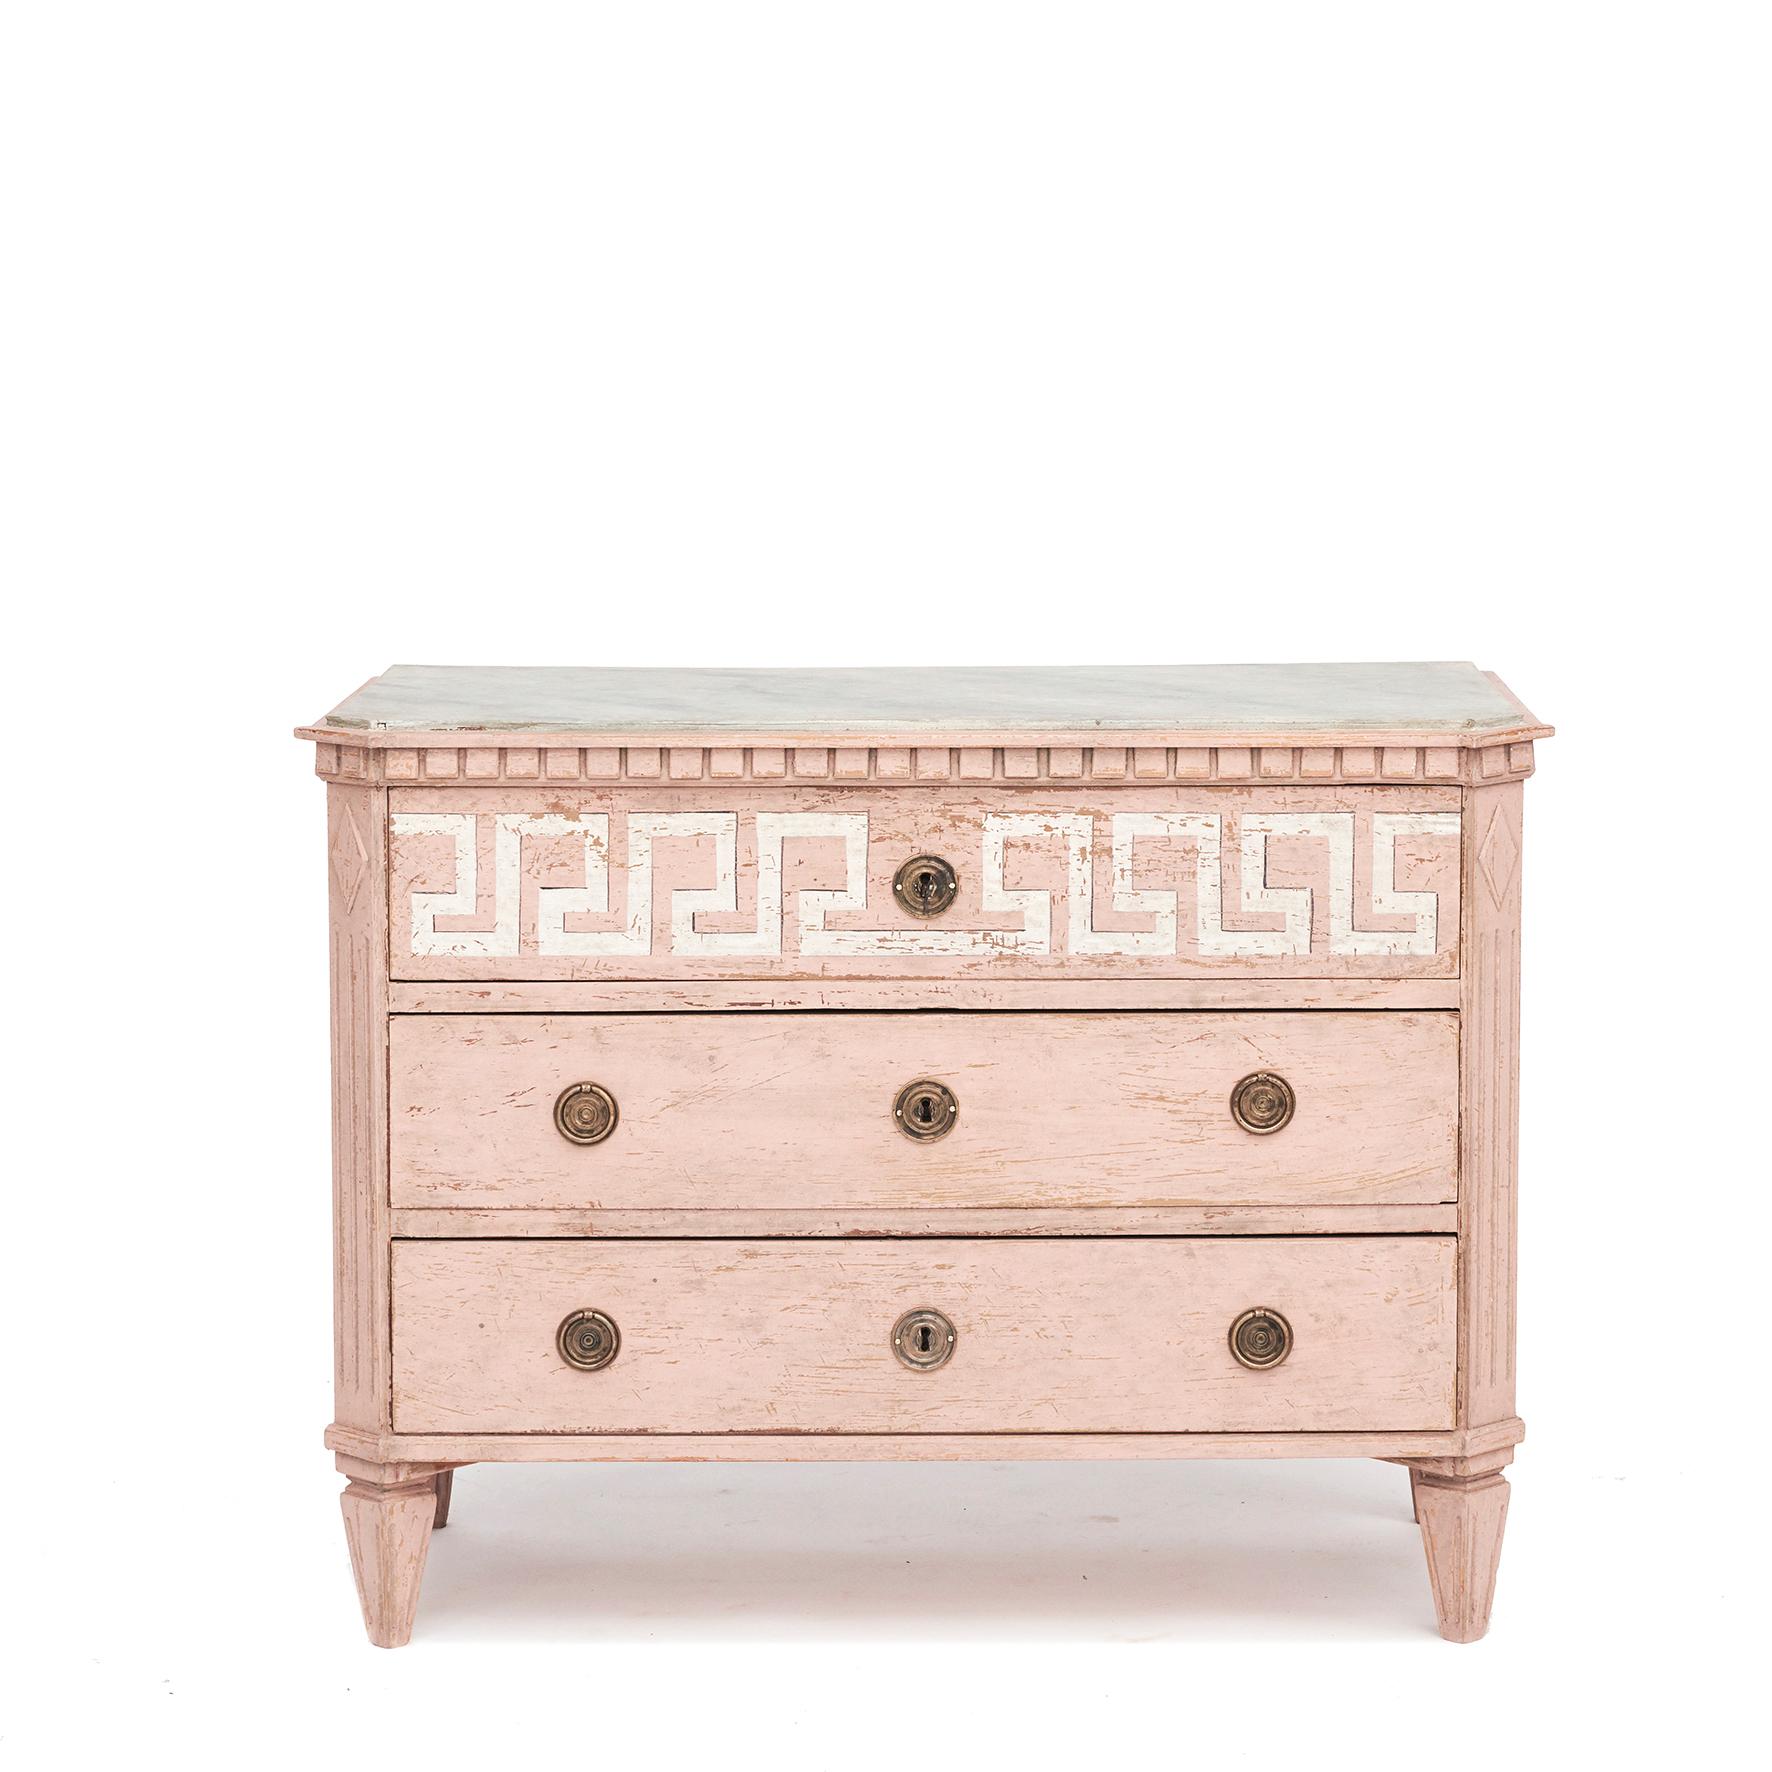 A pair of decorative Swedish Gustavian Style chest of drawers painted in dusty rose.
Wooden blue-gray faux marbled tabletop and dentil moldings.
Three drawer, upper drawer decorated with white painted 